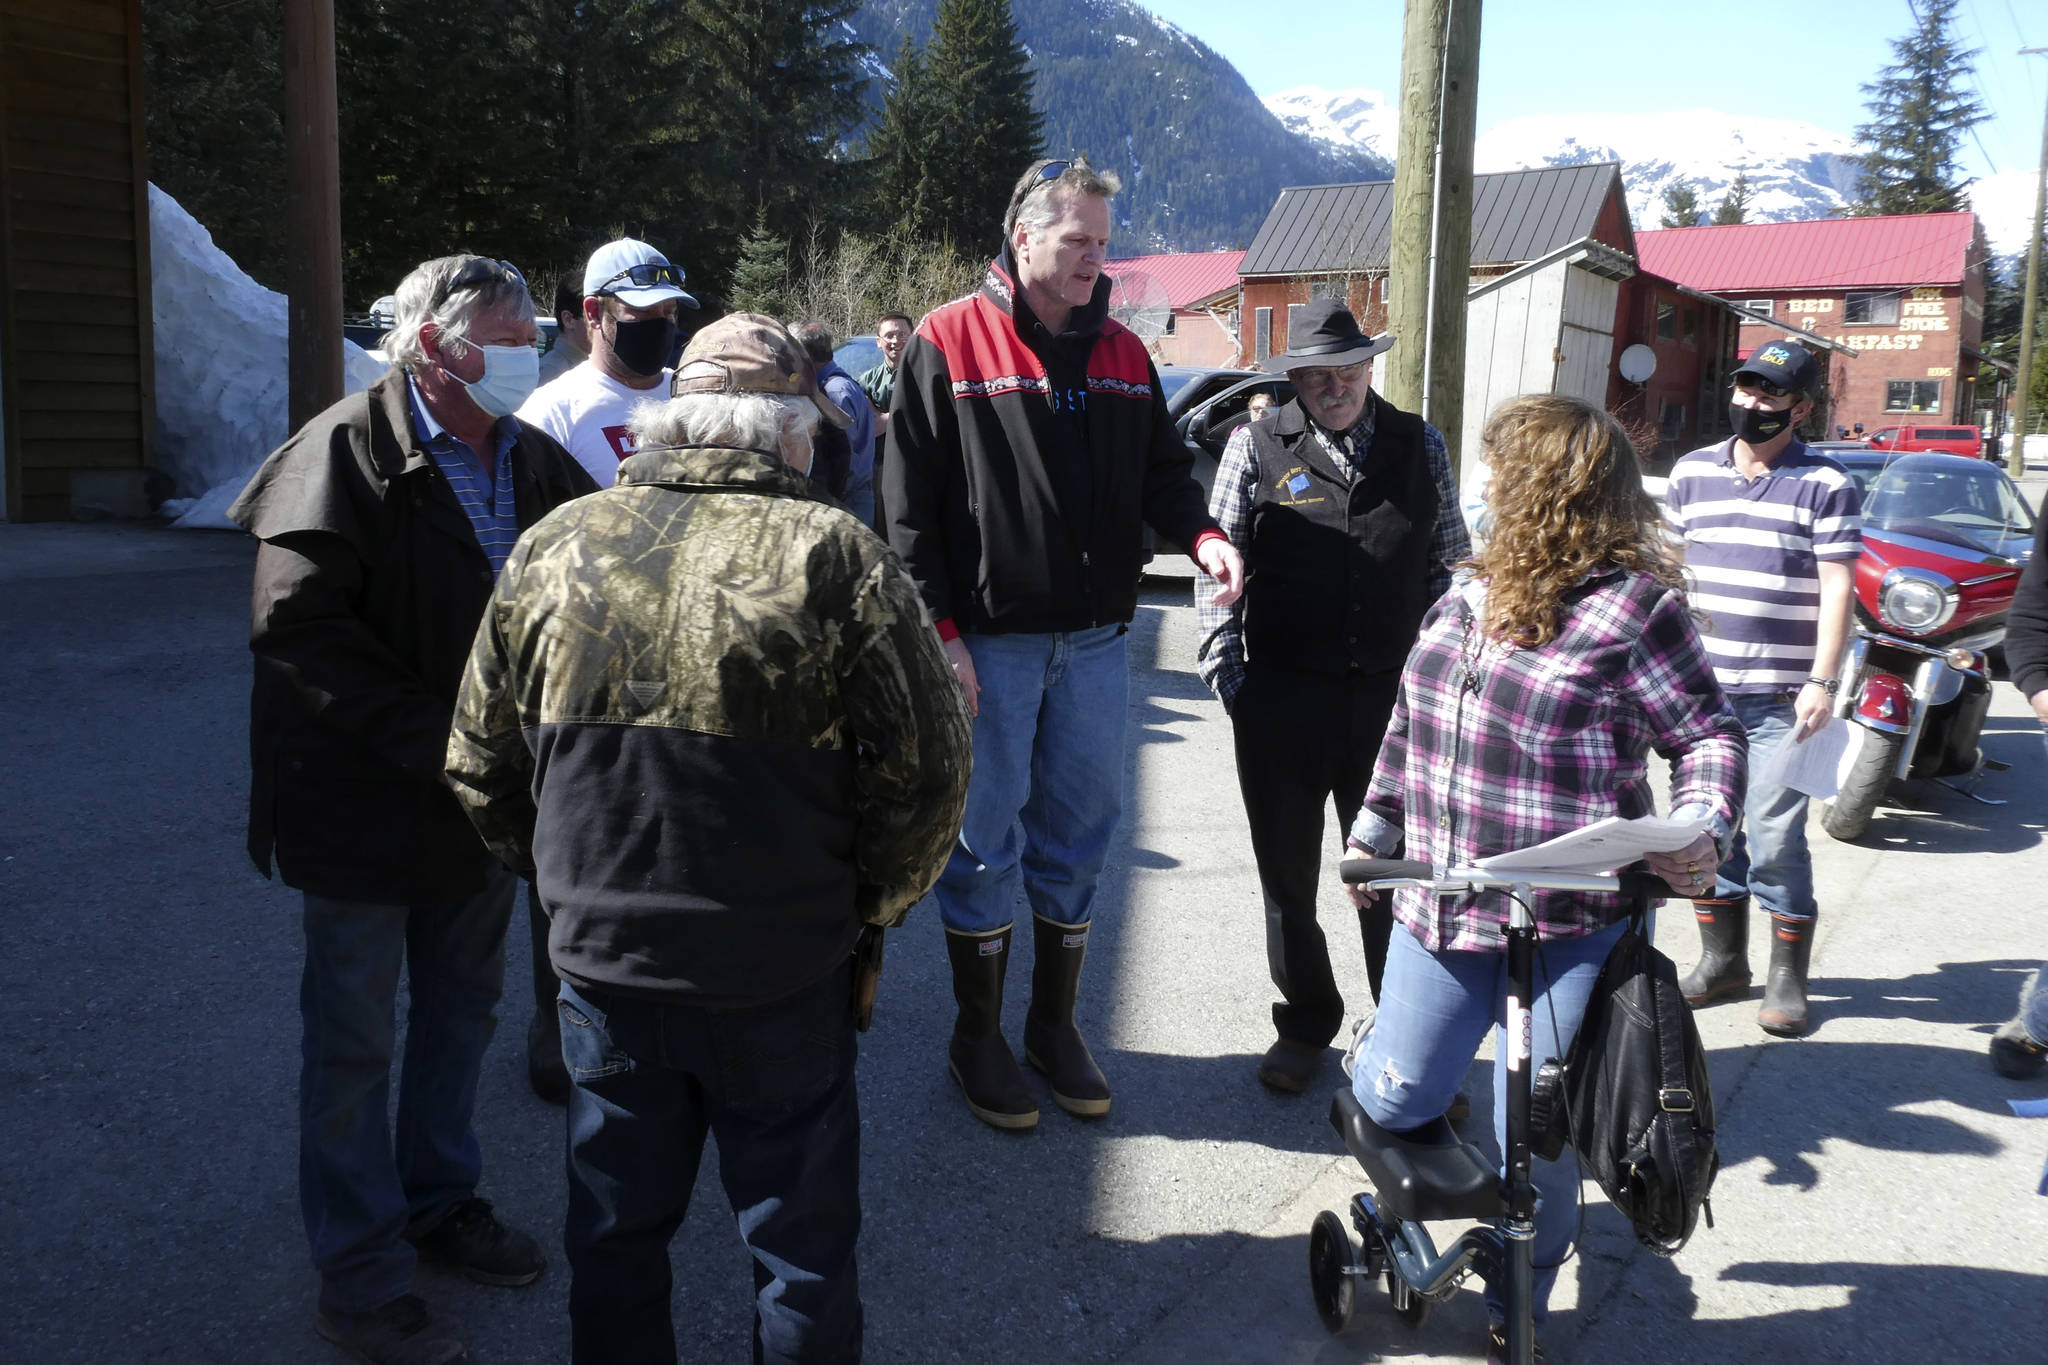 Alaska Gov. Mike Dunleavy, center, meets with people near an outdoor COVID-19 vaccination clinic in Hyder, Alaska, on Thursday, April 22, 2021. Dunleavy said Alaska is in a fortunate position with its vaccine supply and he wants to share vaccines with people across the border in Stewart, British Columbia, a community that has close ties to Hyder. (AP Photo/Becky Bohrer)